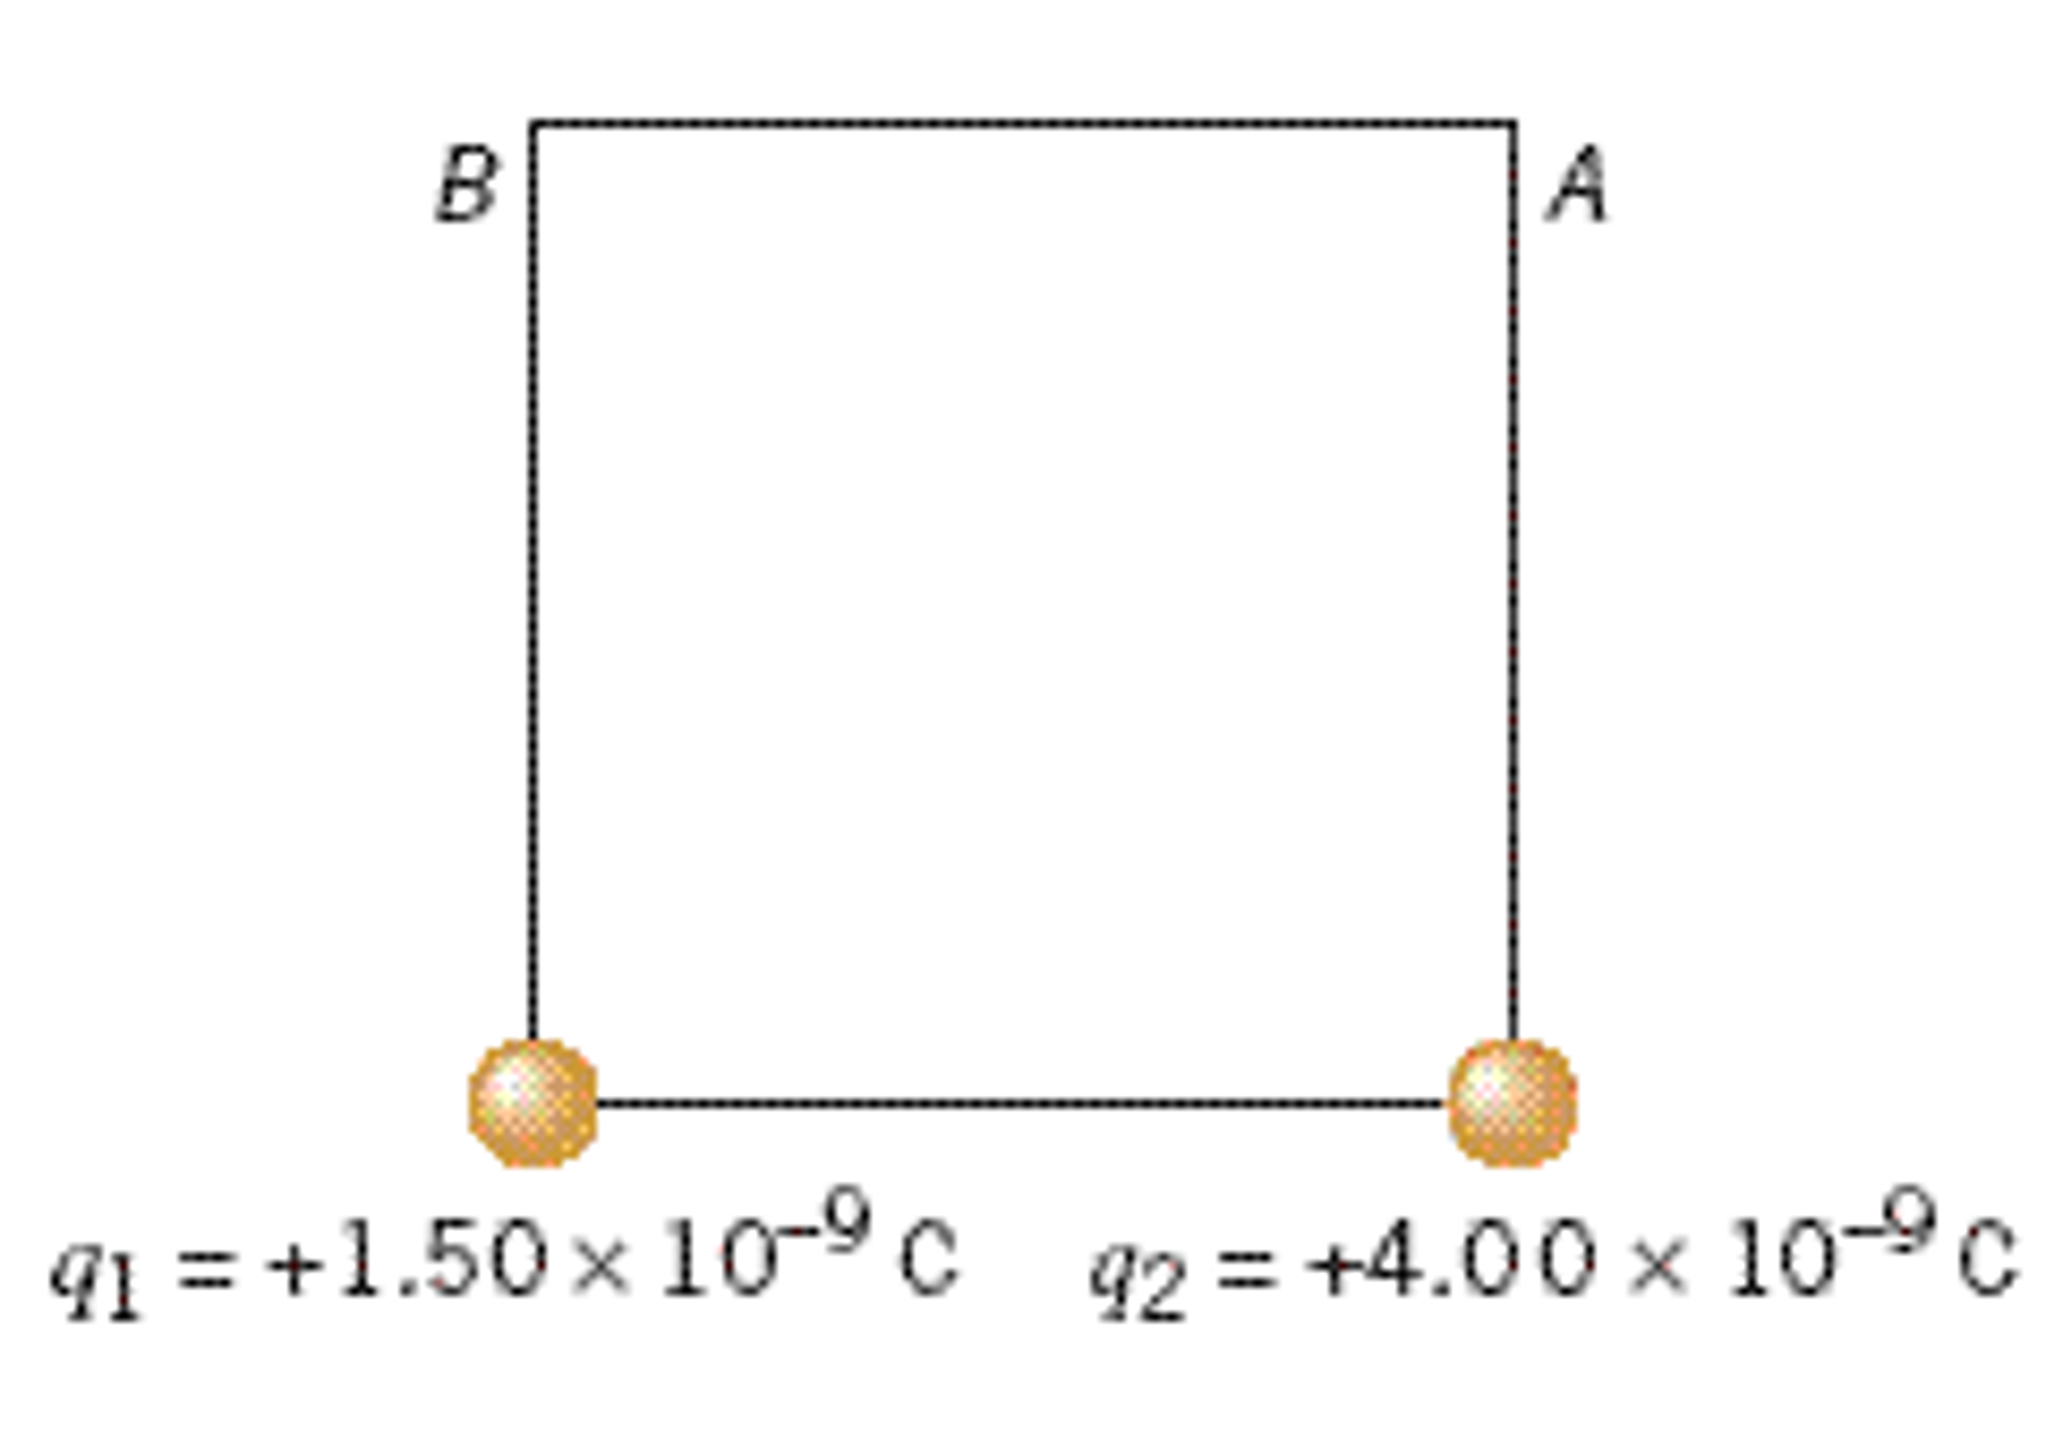 Solved The drawing shows a square, each side of which has a